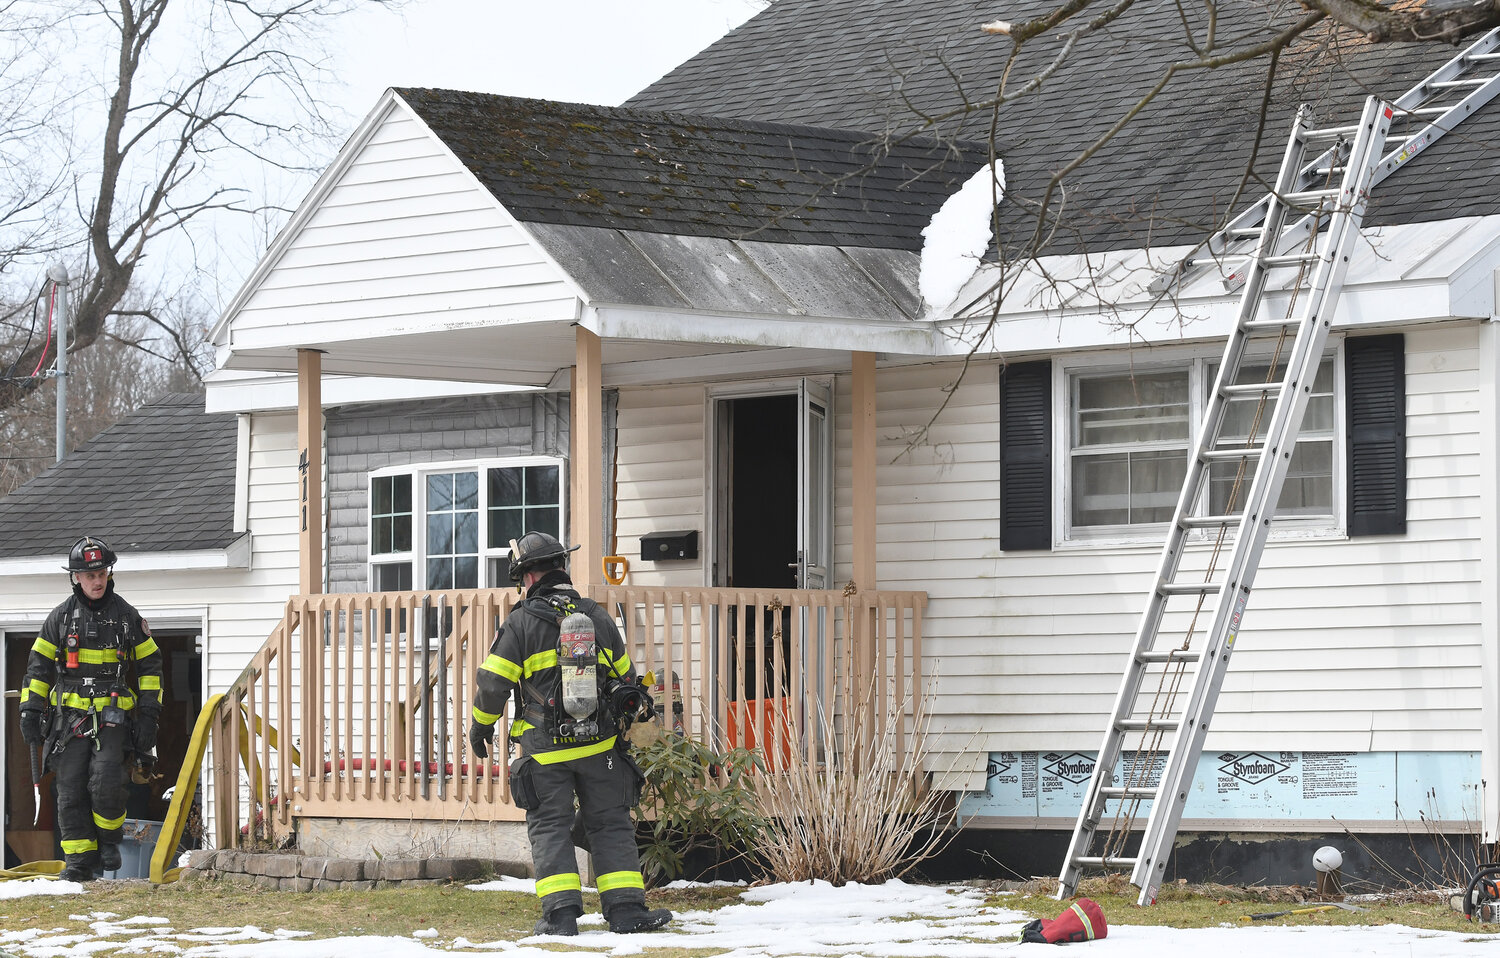 Utica firefighters knocked down a fire at 411 Lee Blvd. on the city’s north side Friday morning. Authorities said the alarm was raised at 10:28 a.m. and the flames were quickly knocked down. No one is believed to have been injured. The cause of the fire remains under investigation.